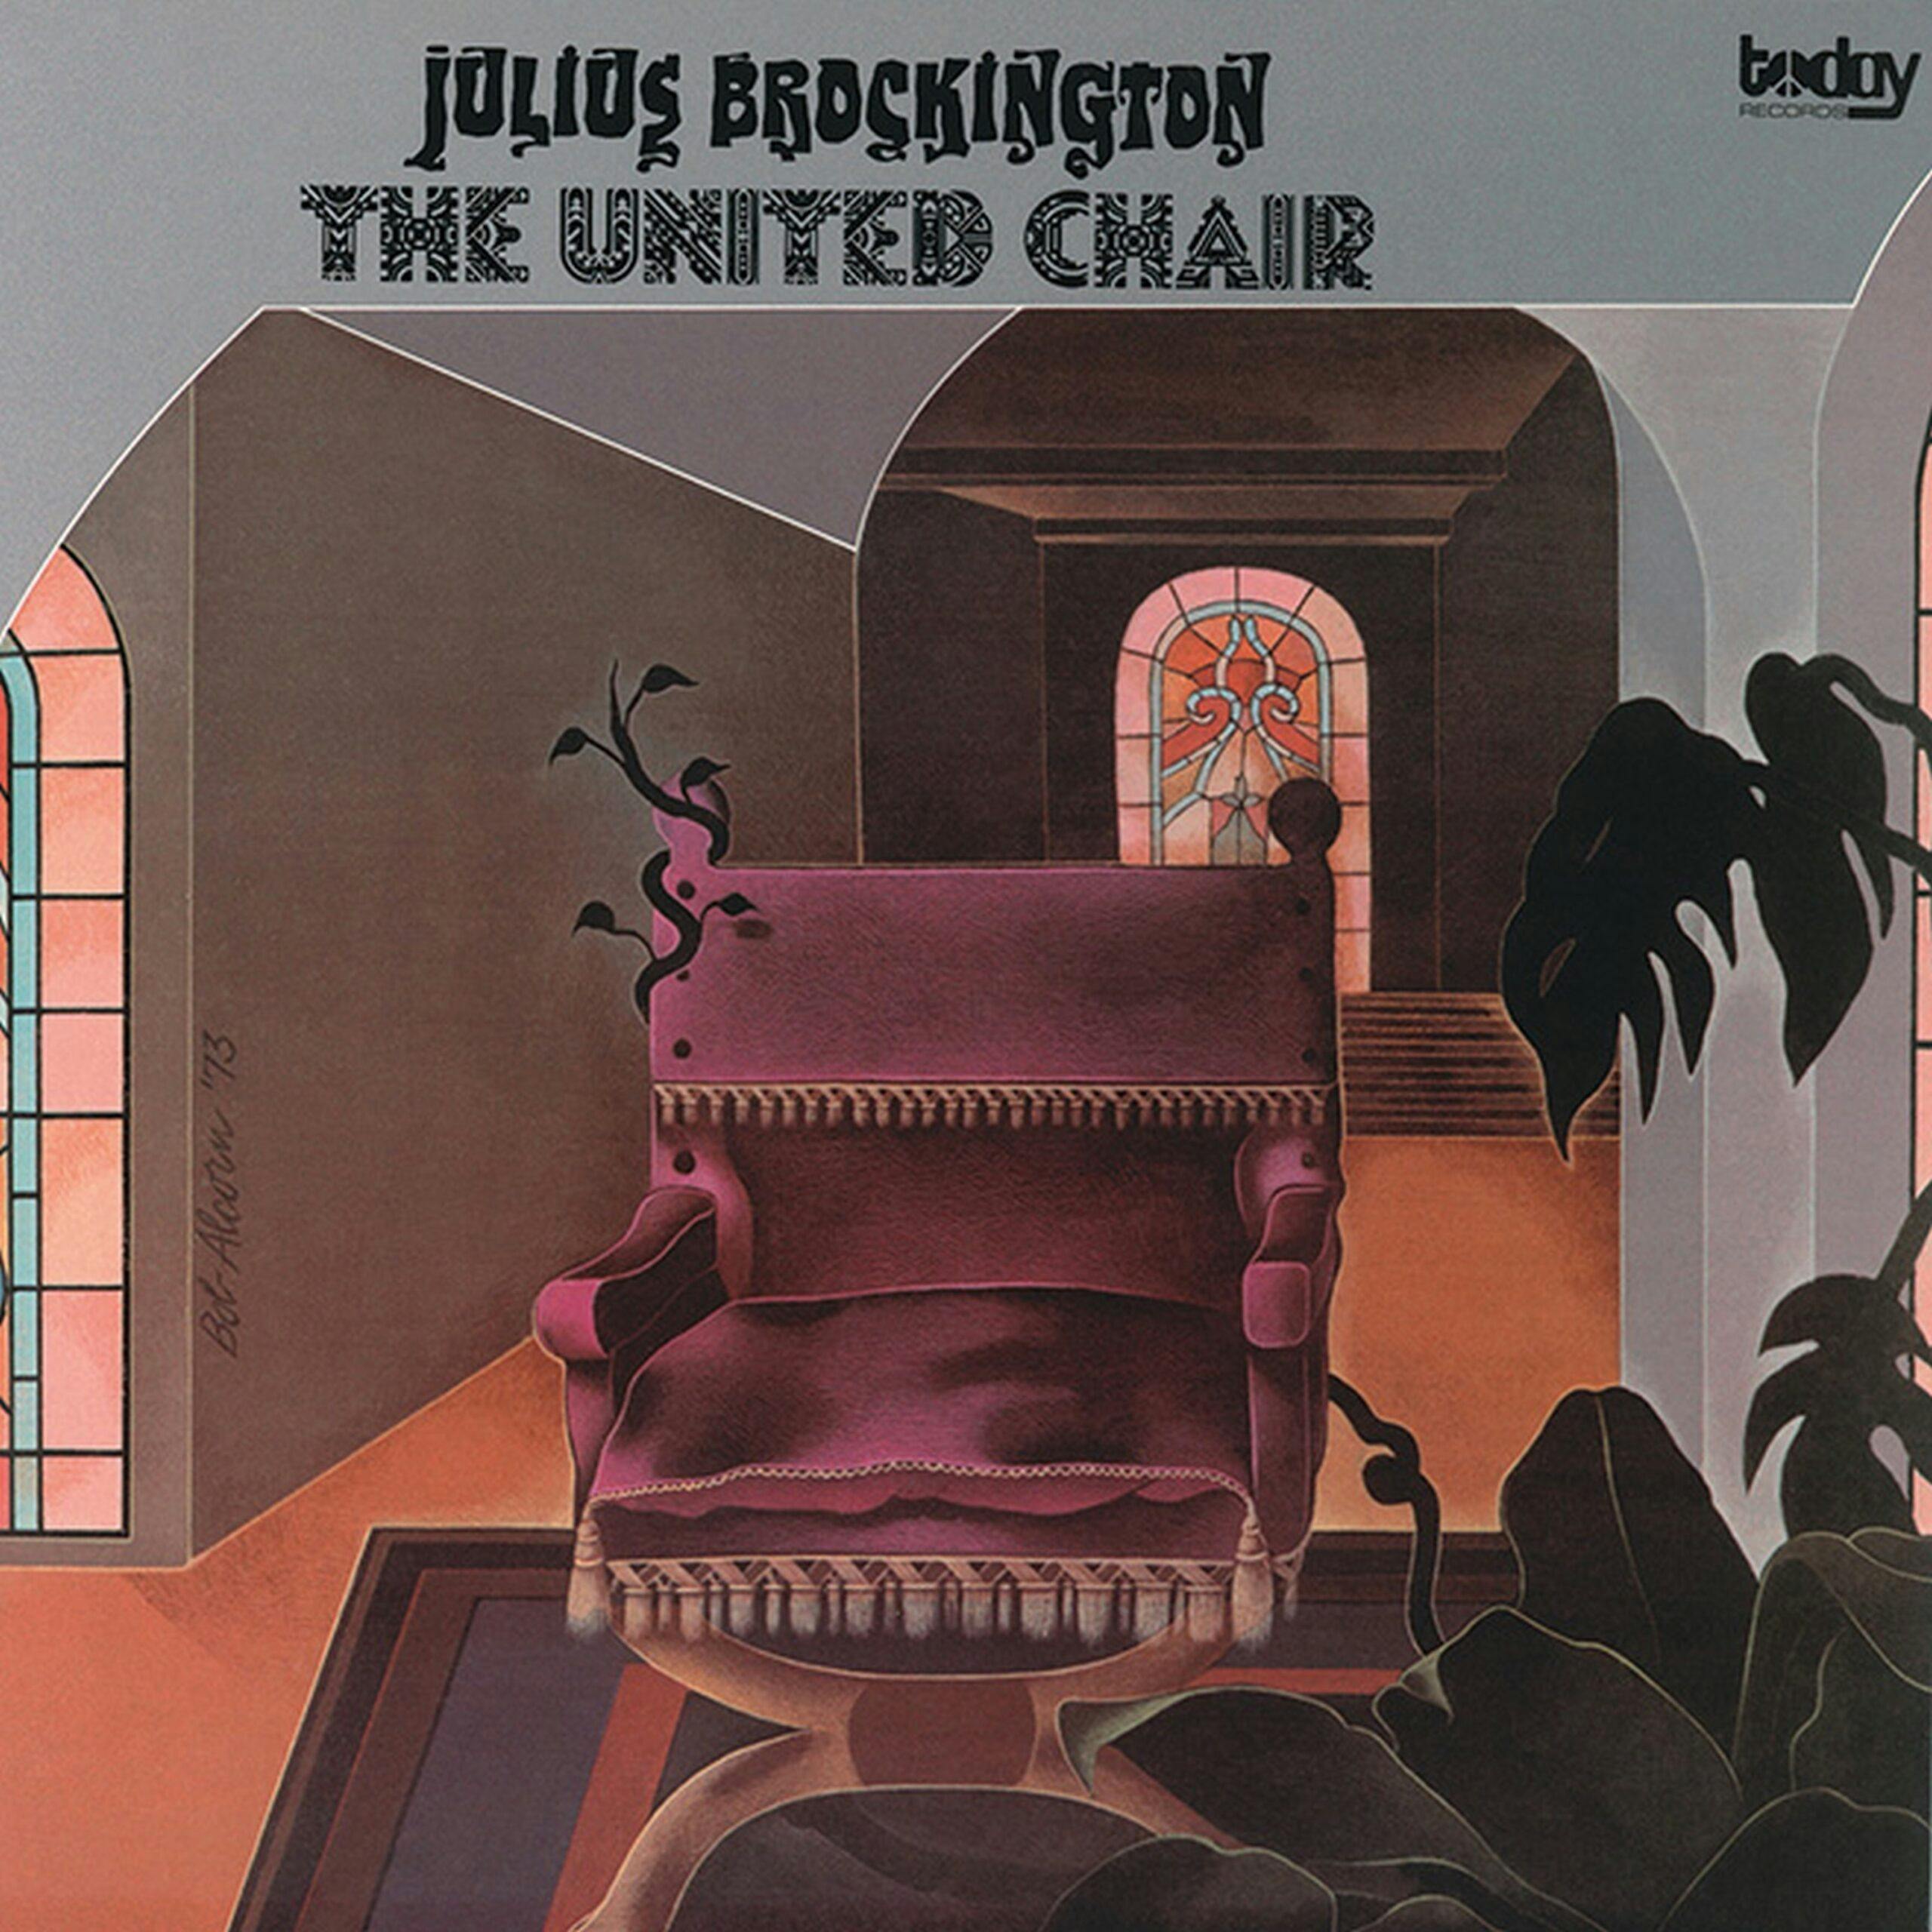 Released in 1973 on Patrick Adams' Today subsidiary of Perception Records, The United Chair, is the follow up to Julius Brockington's debut 1972 release, Sophisticated Funk.